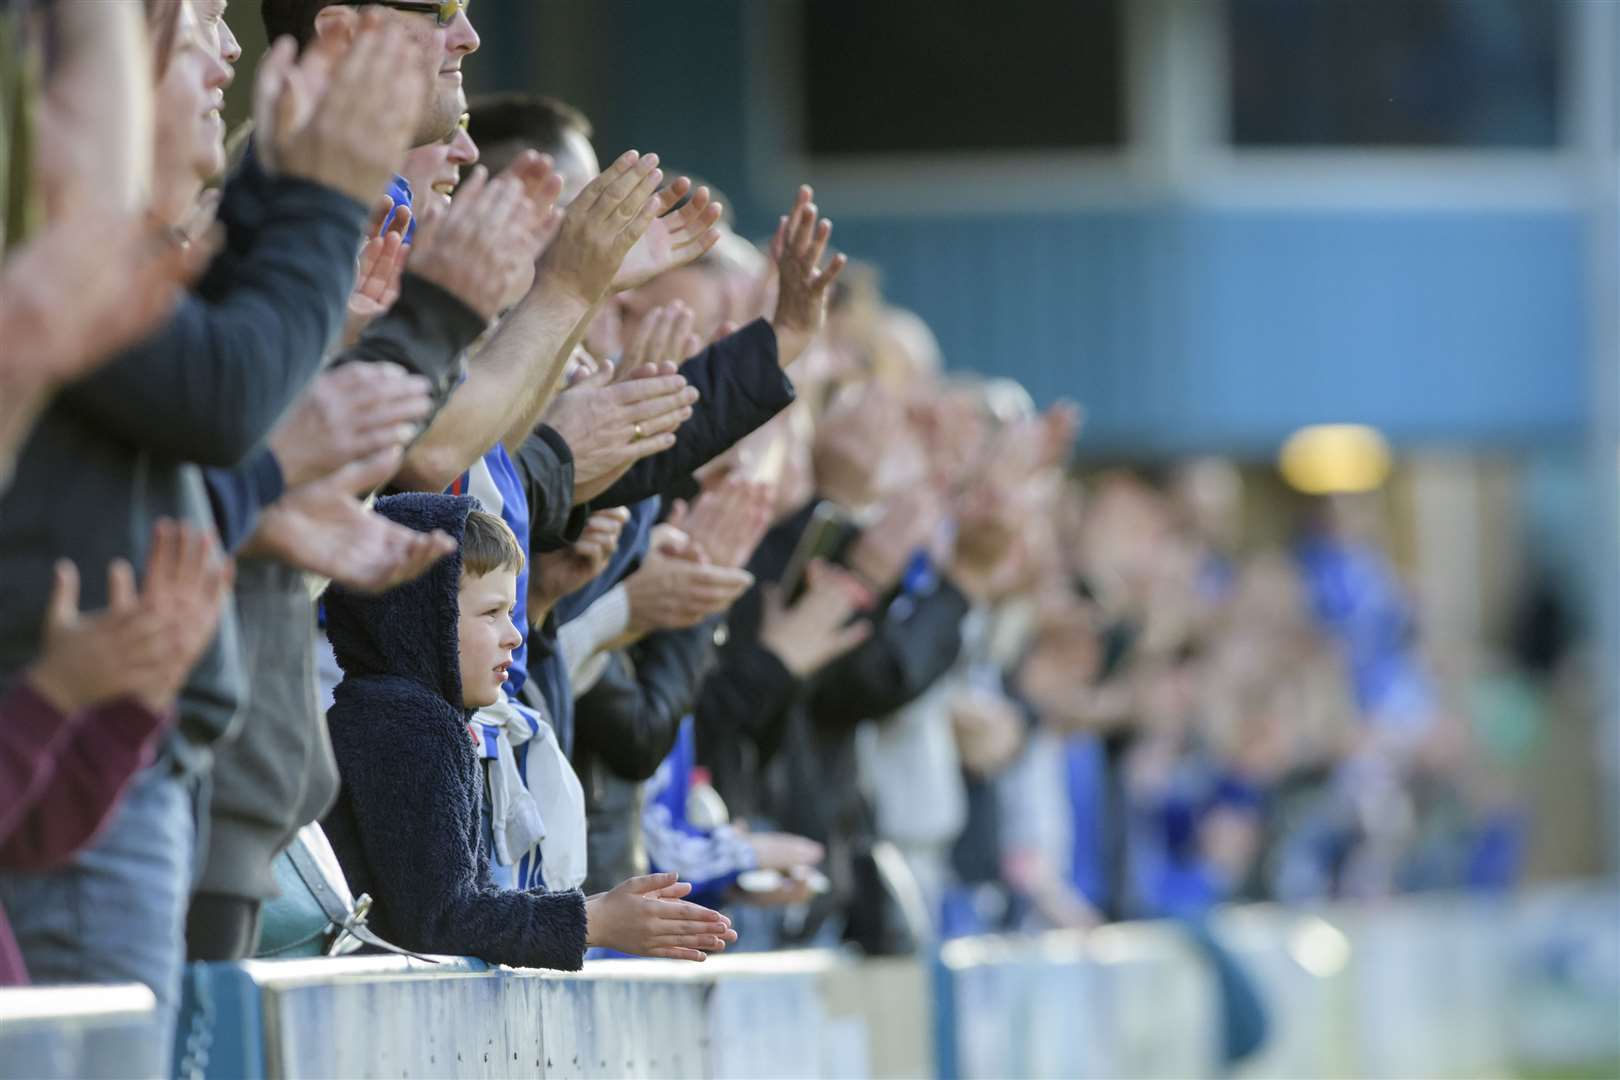 There will be a sell-out crowd at Priestfield when the Gills take on Crawley this Saturday